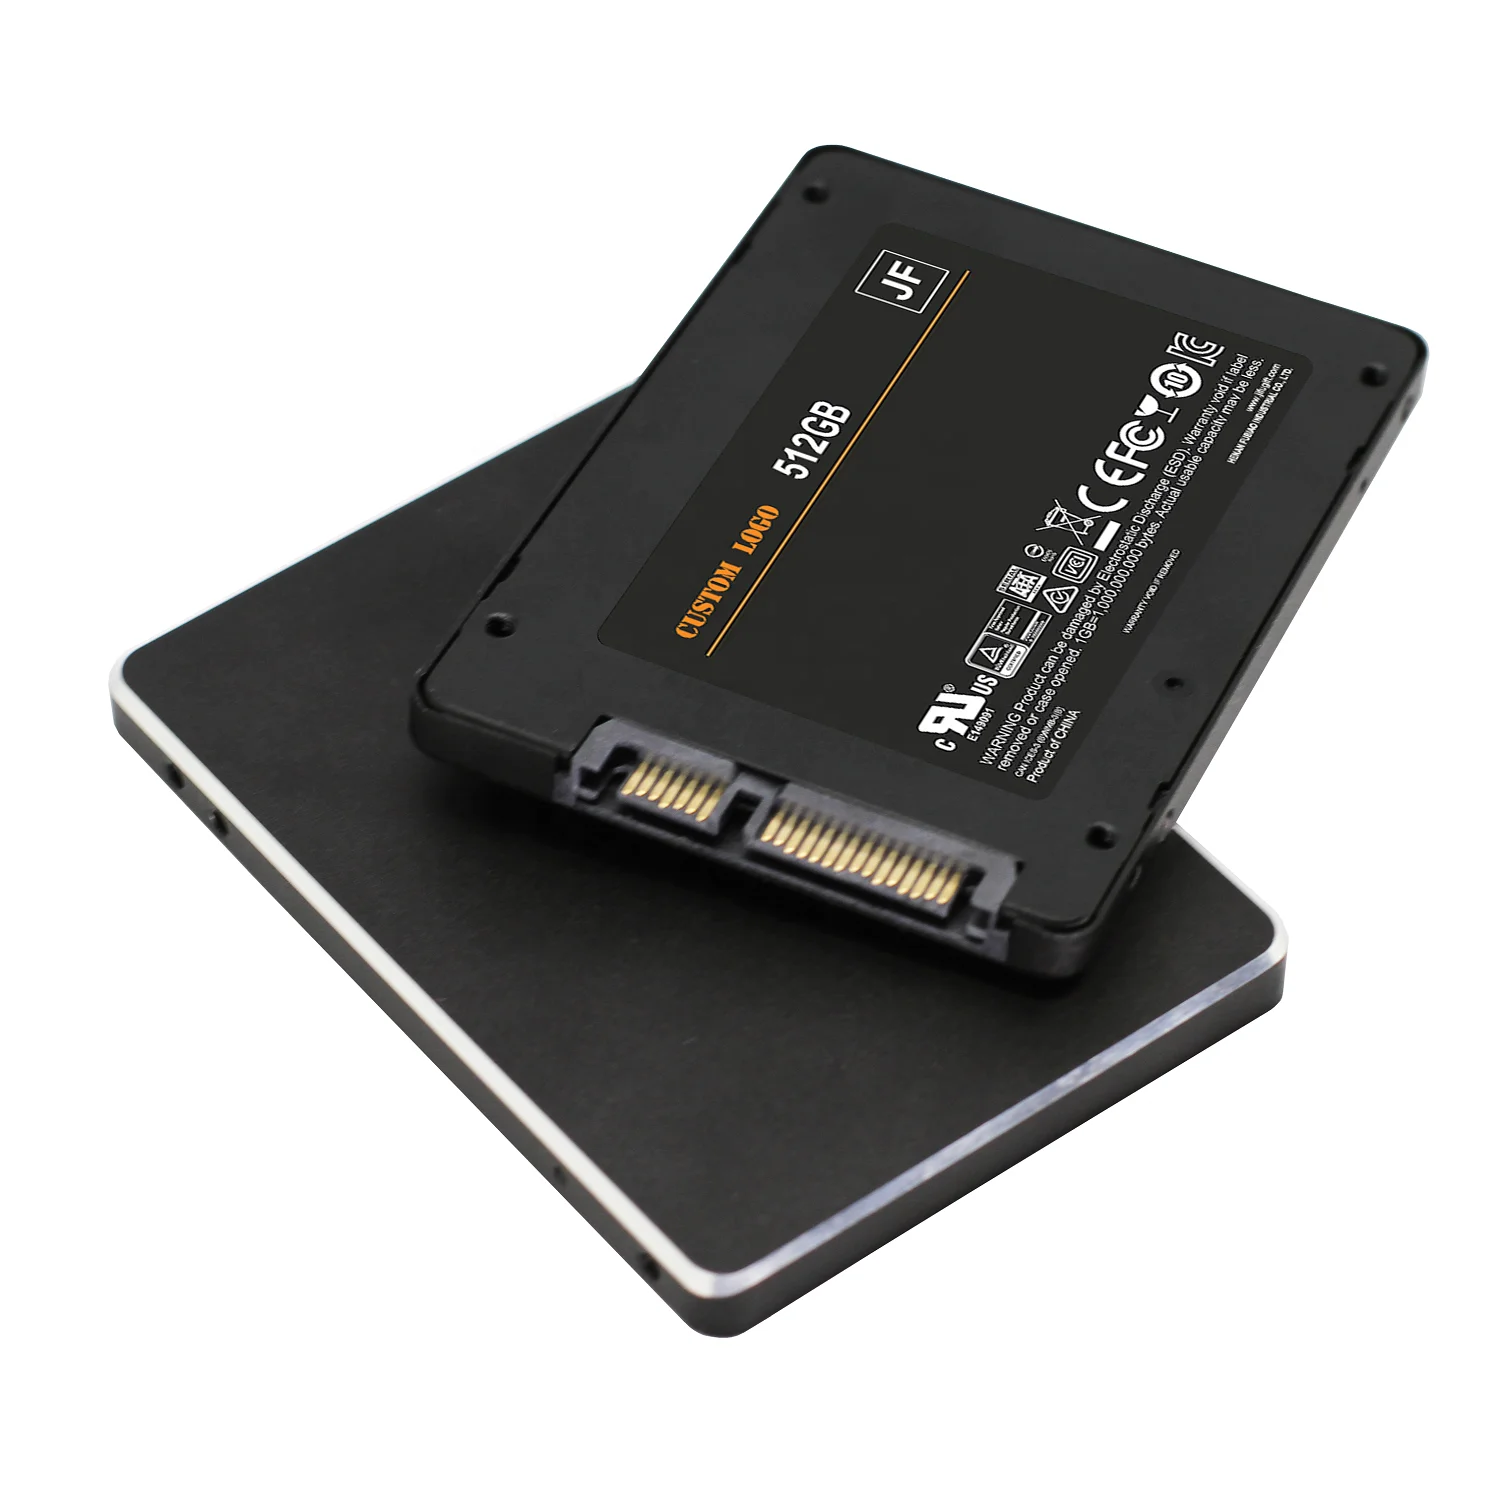 SATA III Interface Fast Speed Solid State Drive Black 2.5'' inch 60GB SSD 